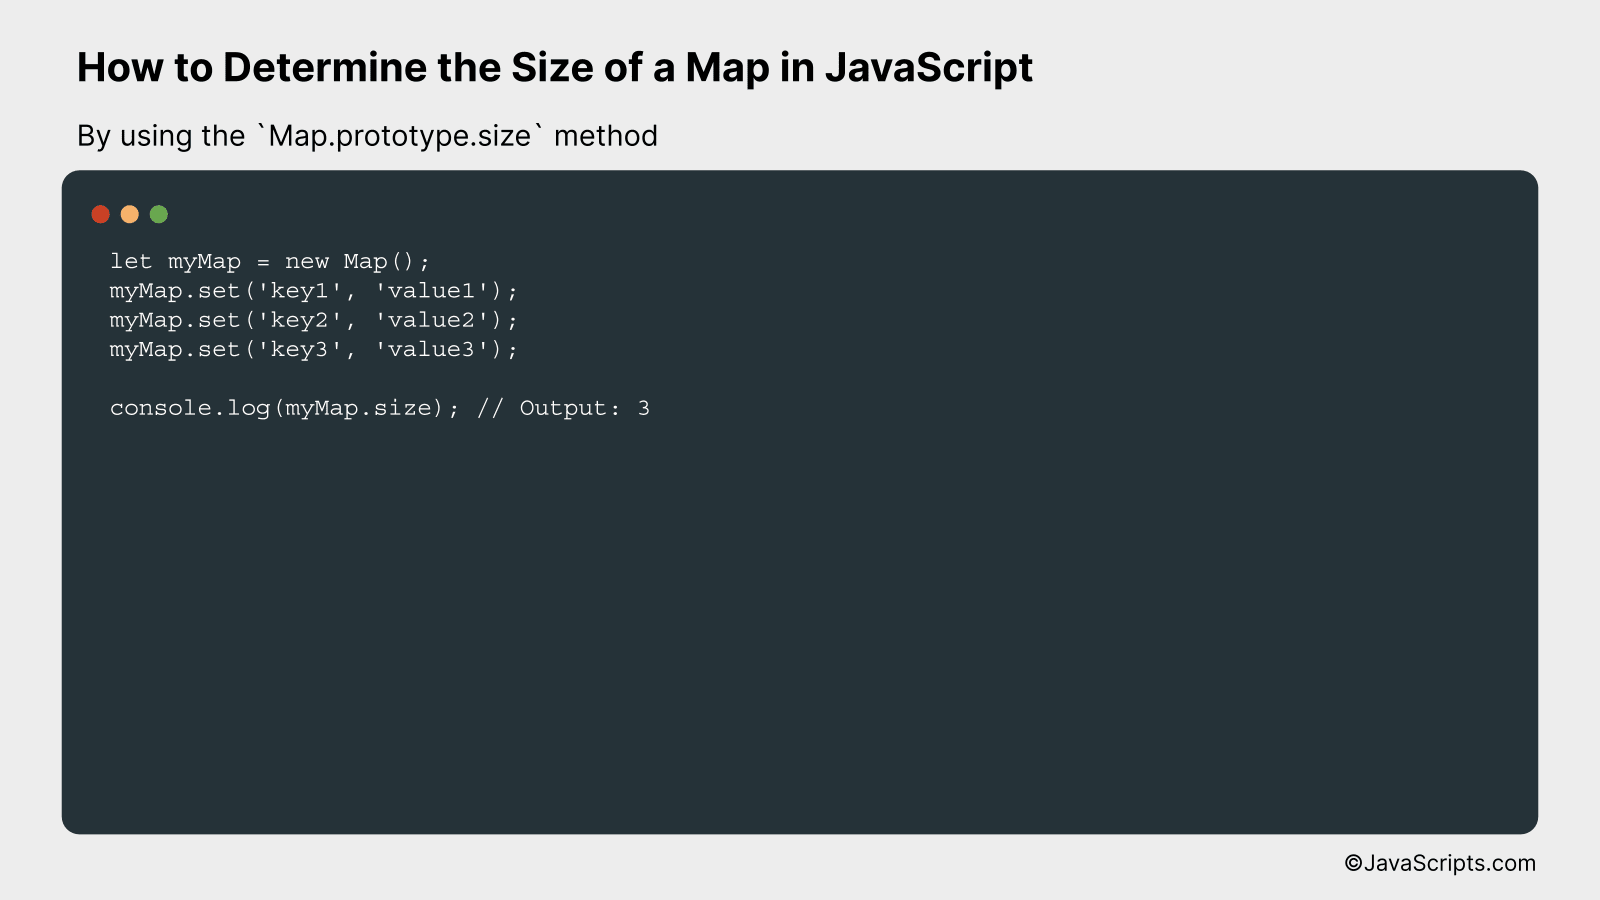 By using the Map.prototype.size method